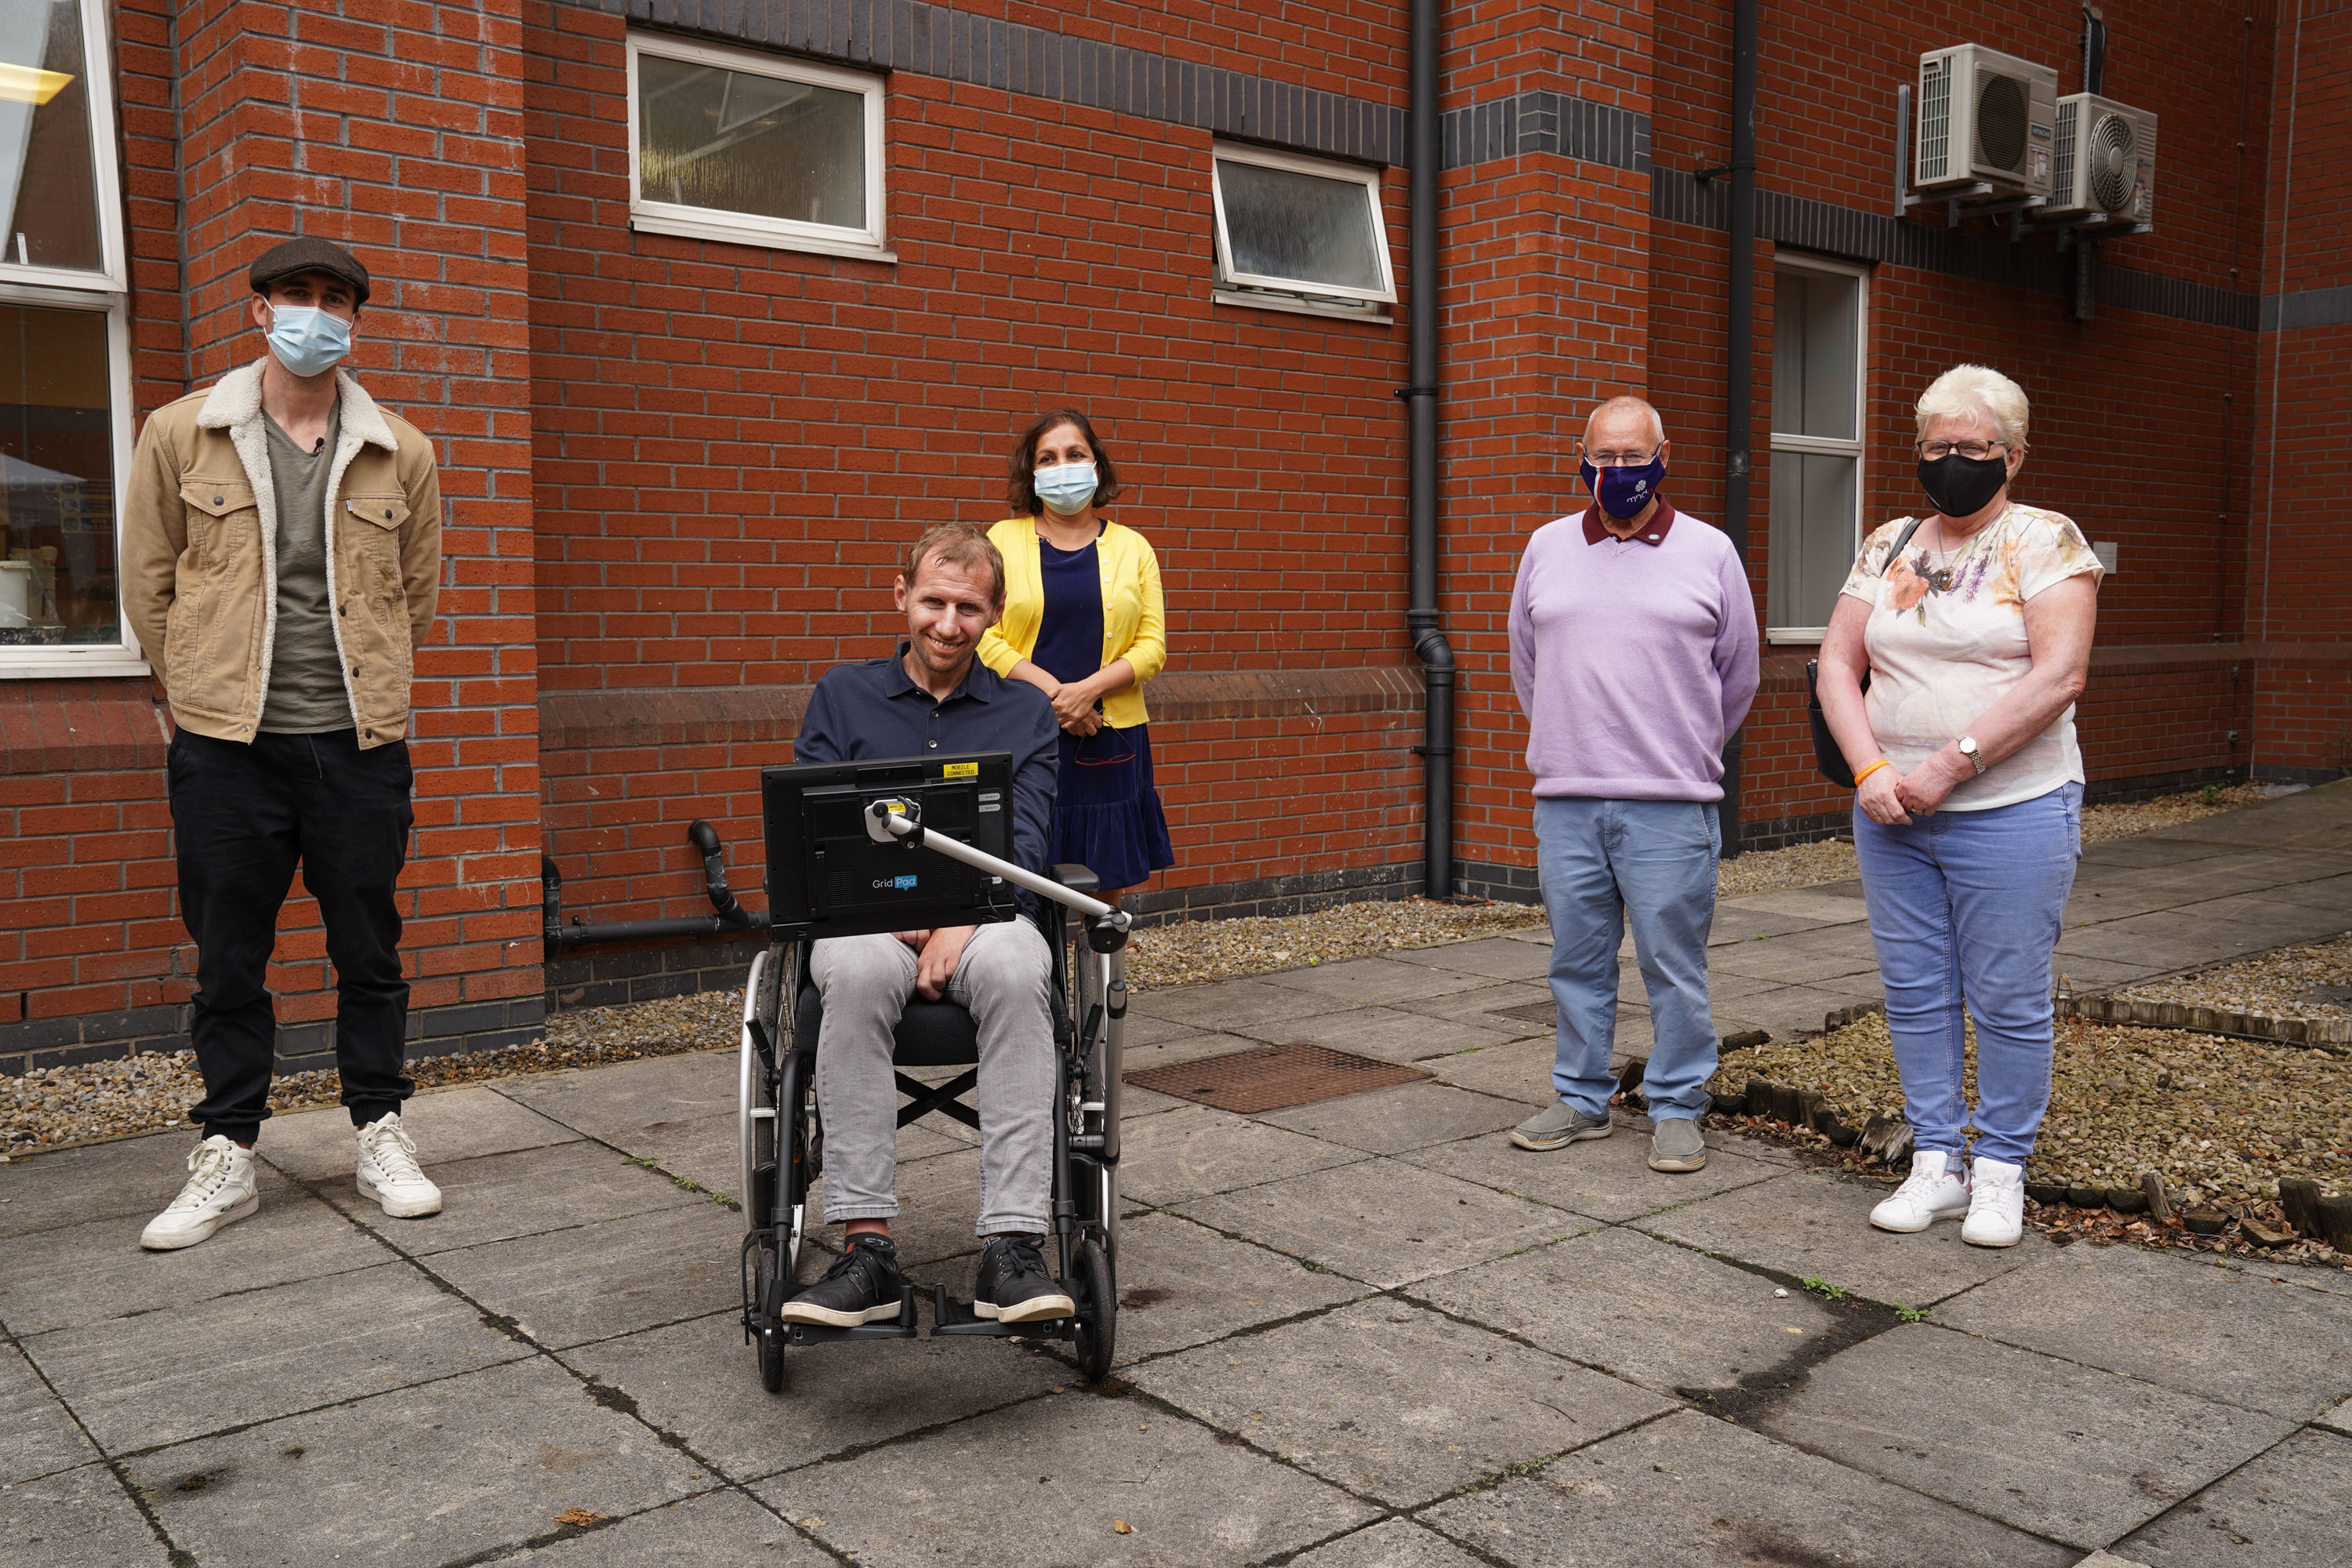 The current MND centre where Mr Burrows has received care was featured in his BBC documentary. (Leeds Hospitals Charity/PA)